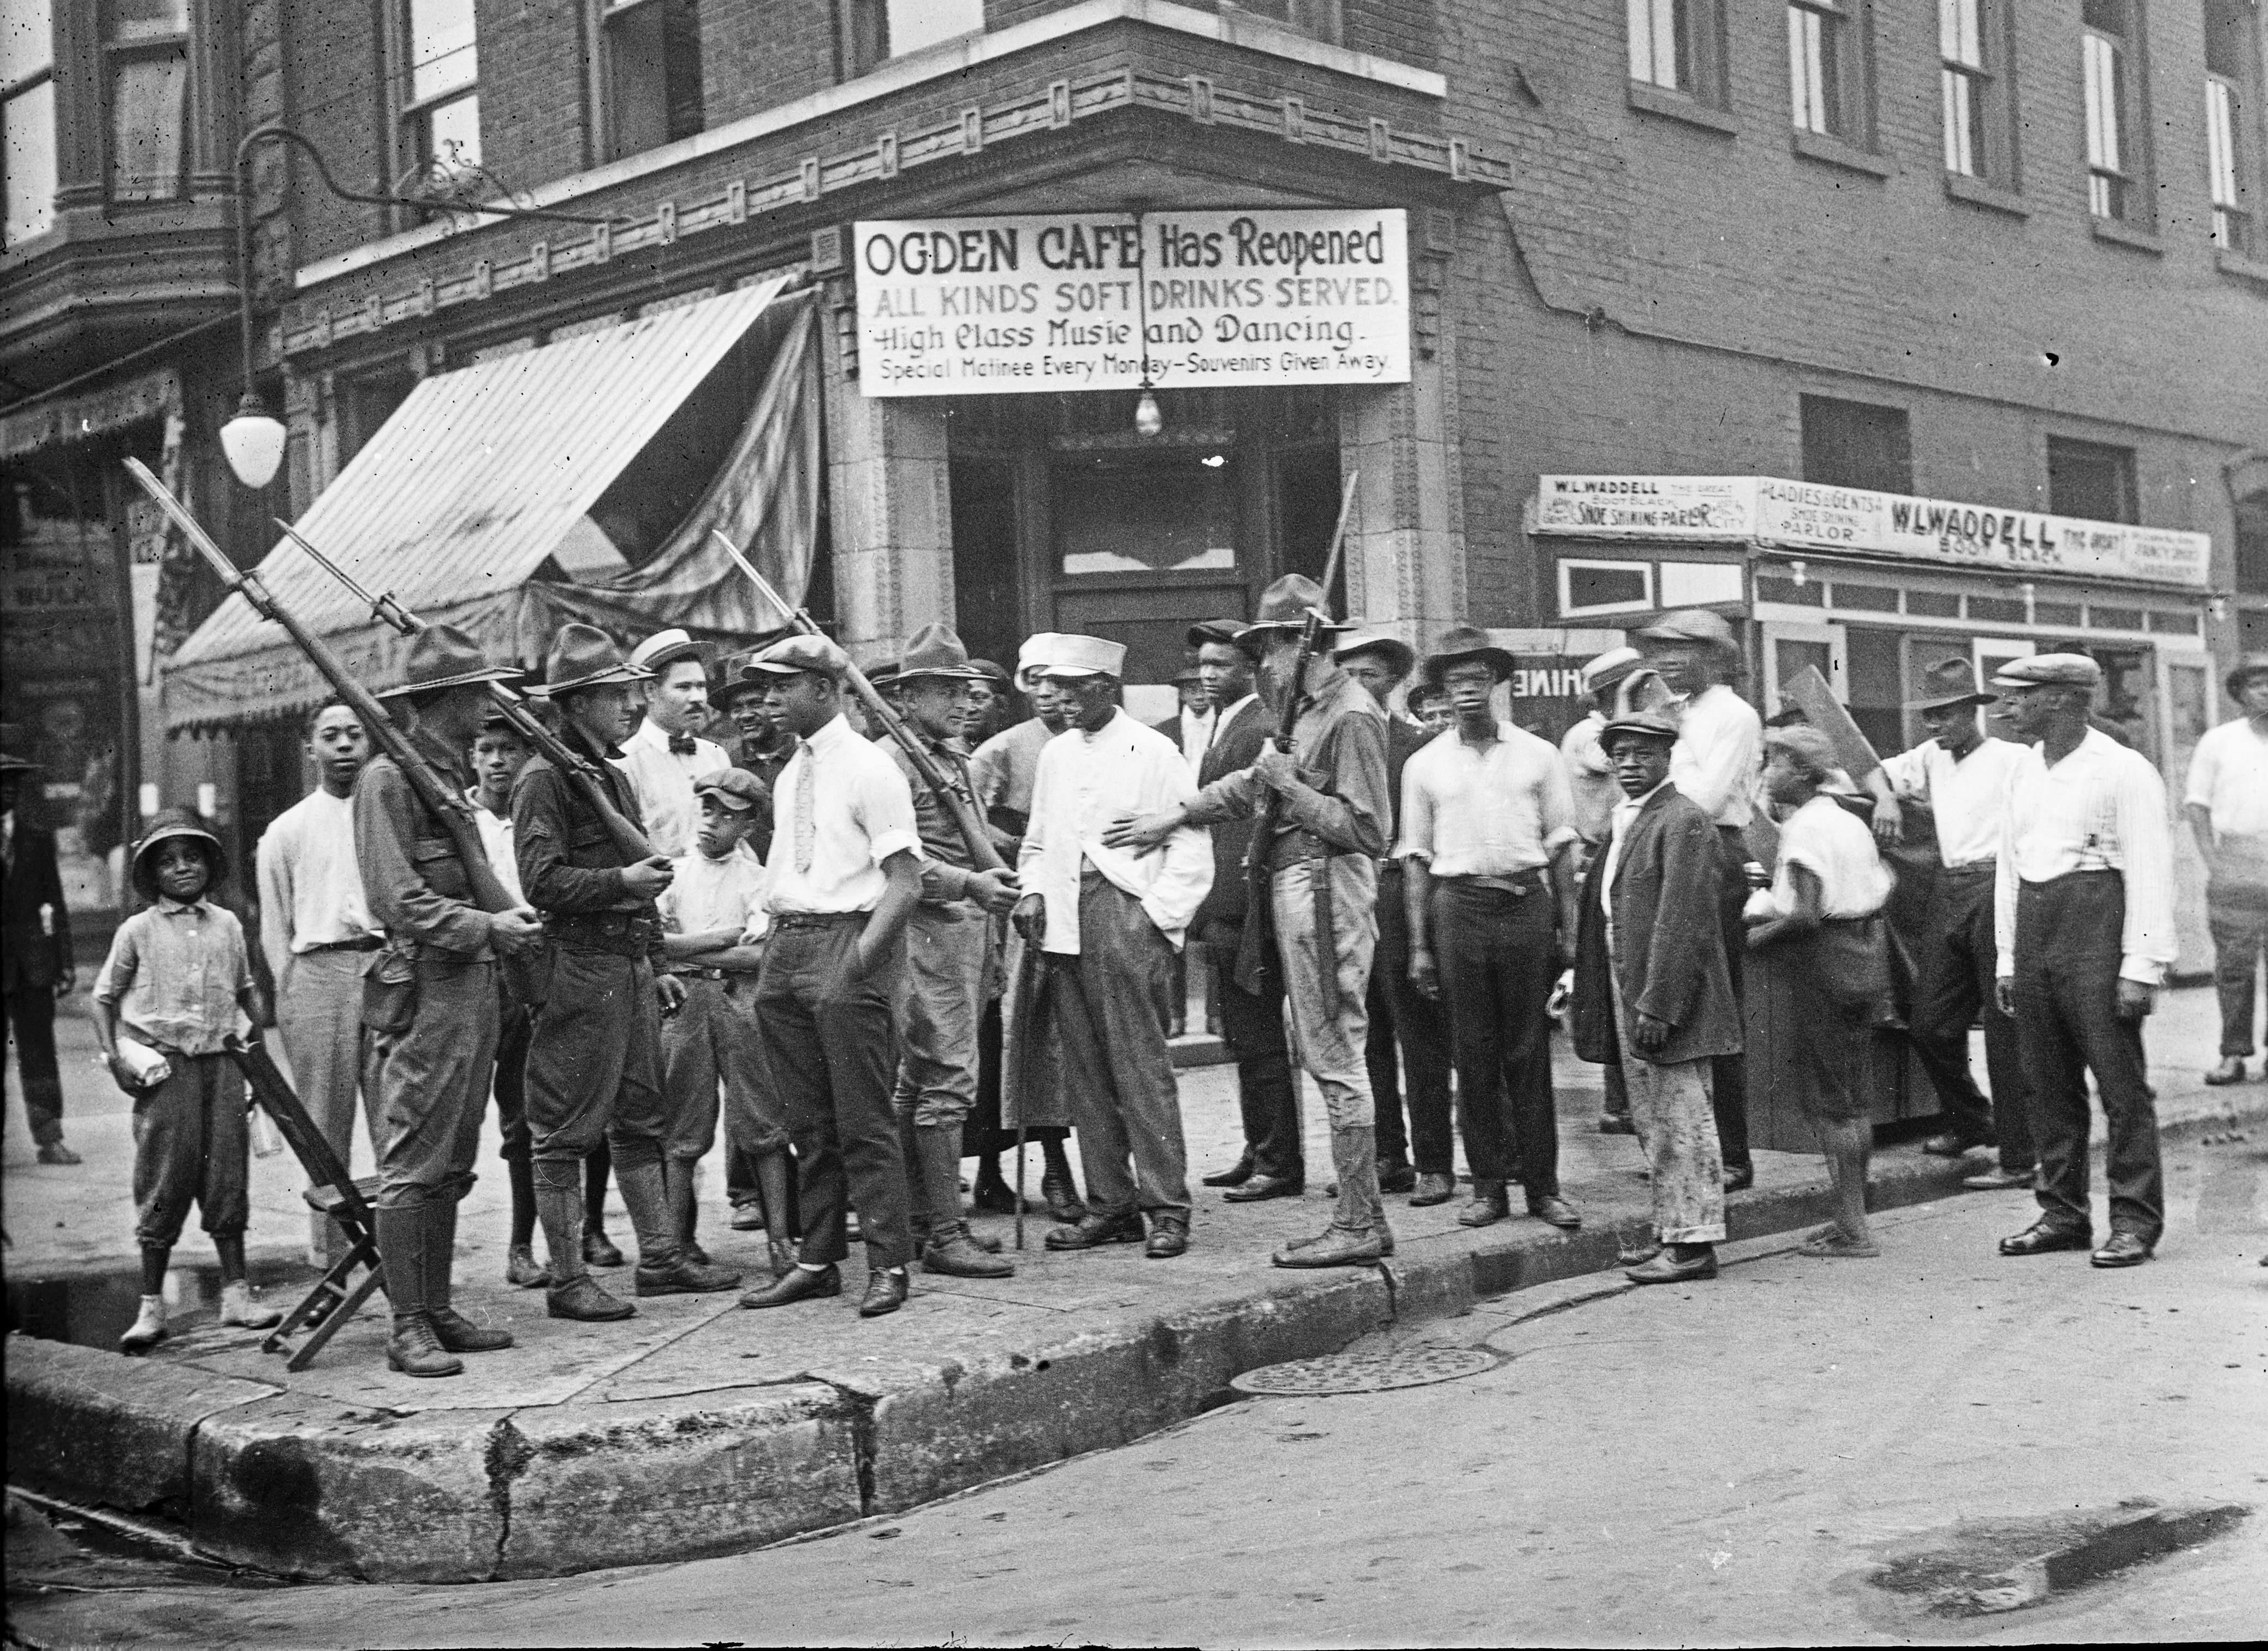 A crowd of men and armed National Guard soldiers stand outside a cafe during the 1919 Race Riots in Chicago.